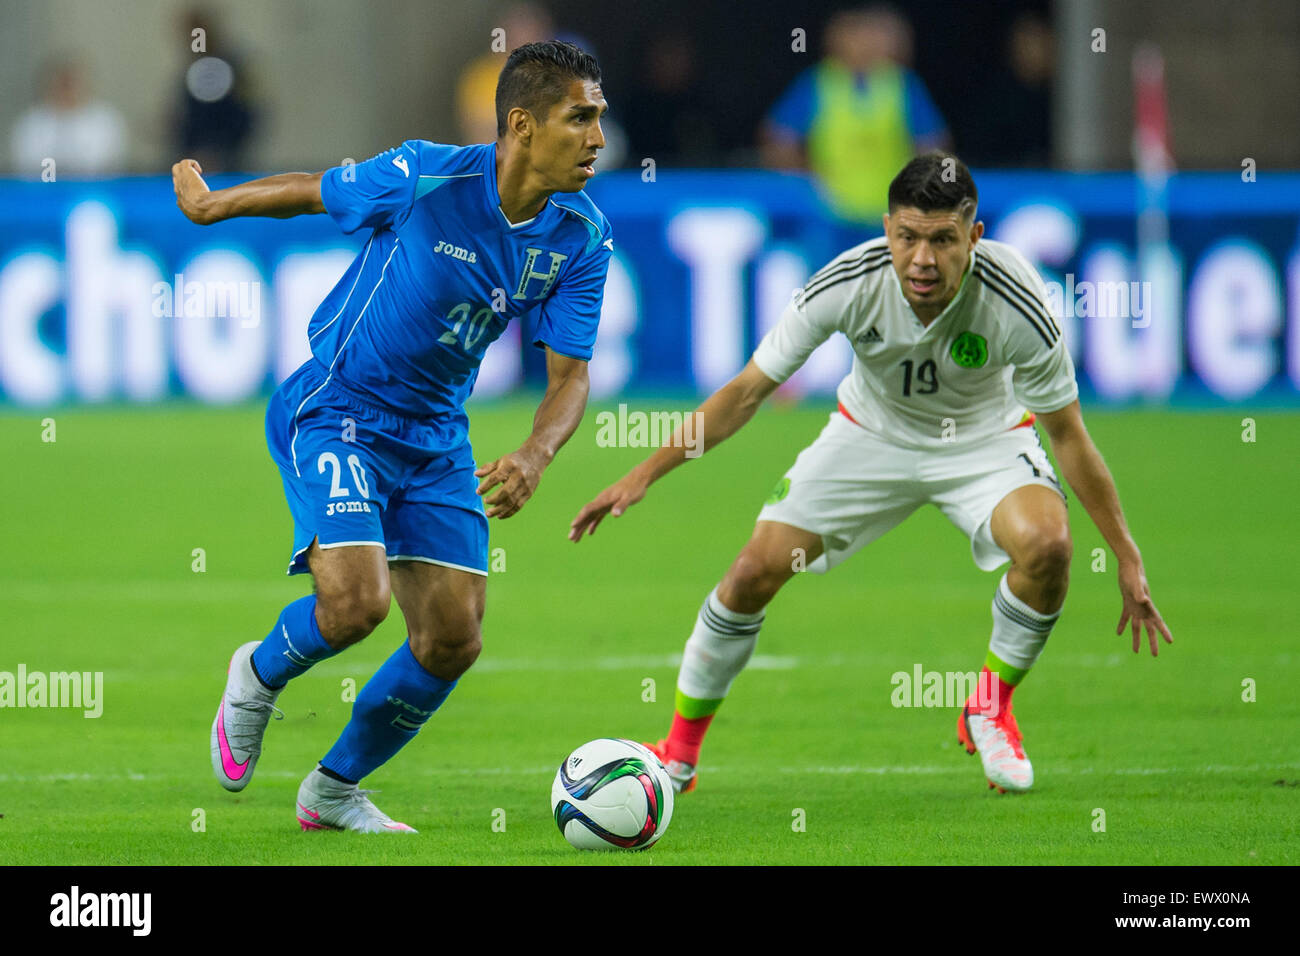 July 1, 2015: Honduras midfielder Jorge Claros (20) controls the ball in front of Mexico forward Oribe Peralta (19) during the 2nd half of an international soccer match between Honduras and Mexico at NRG Stadium in Houston, TX. The game ended in a 0-0 draw.Trask Smith/CSM Stock Photo